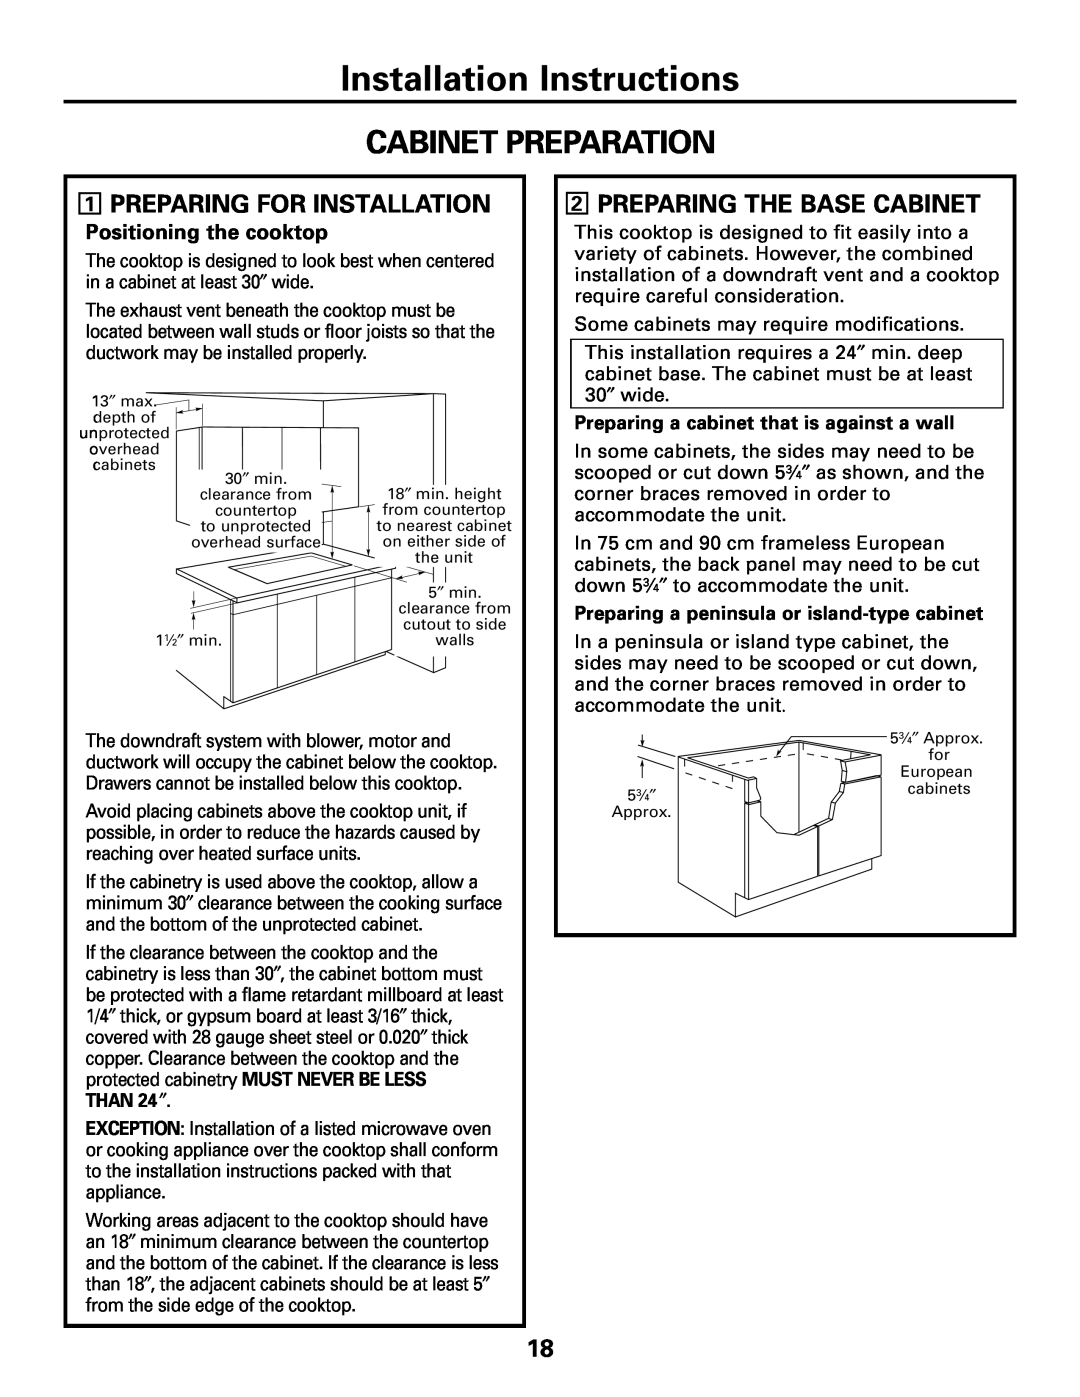 GE JGP989 manual Cabinet Preparation, Installation Instructions, Positioning the cooktop, THAN 24 ″ 